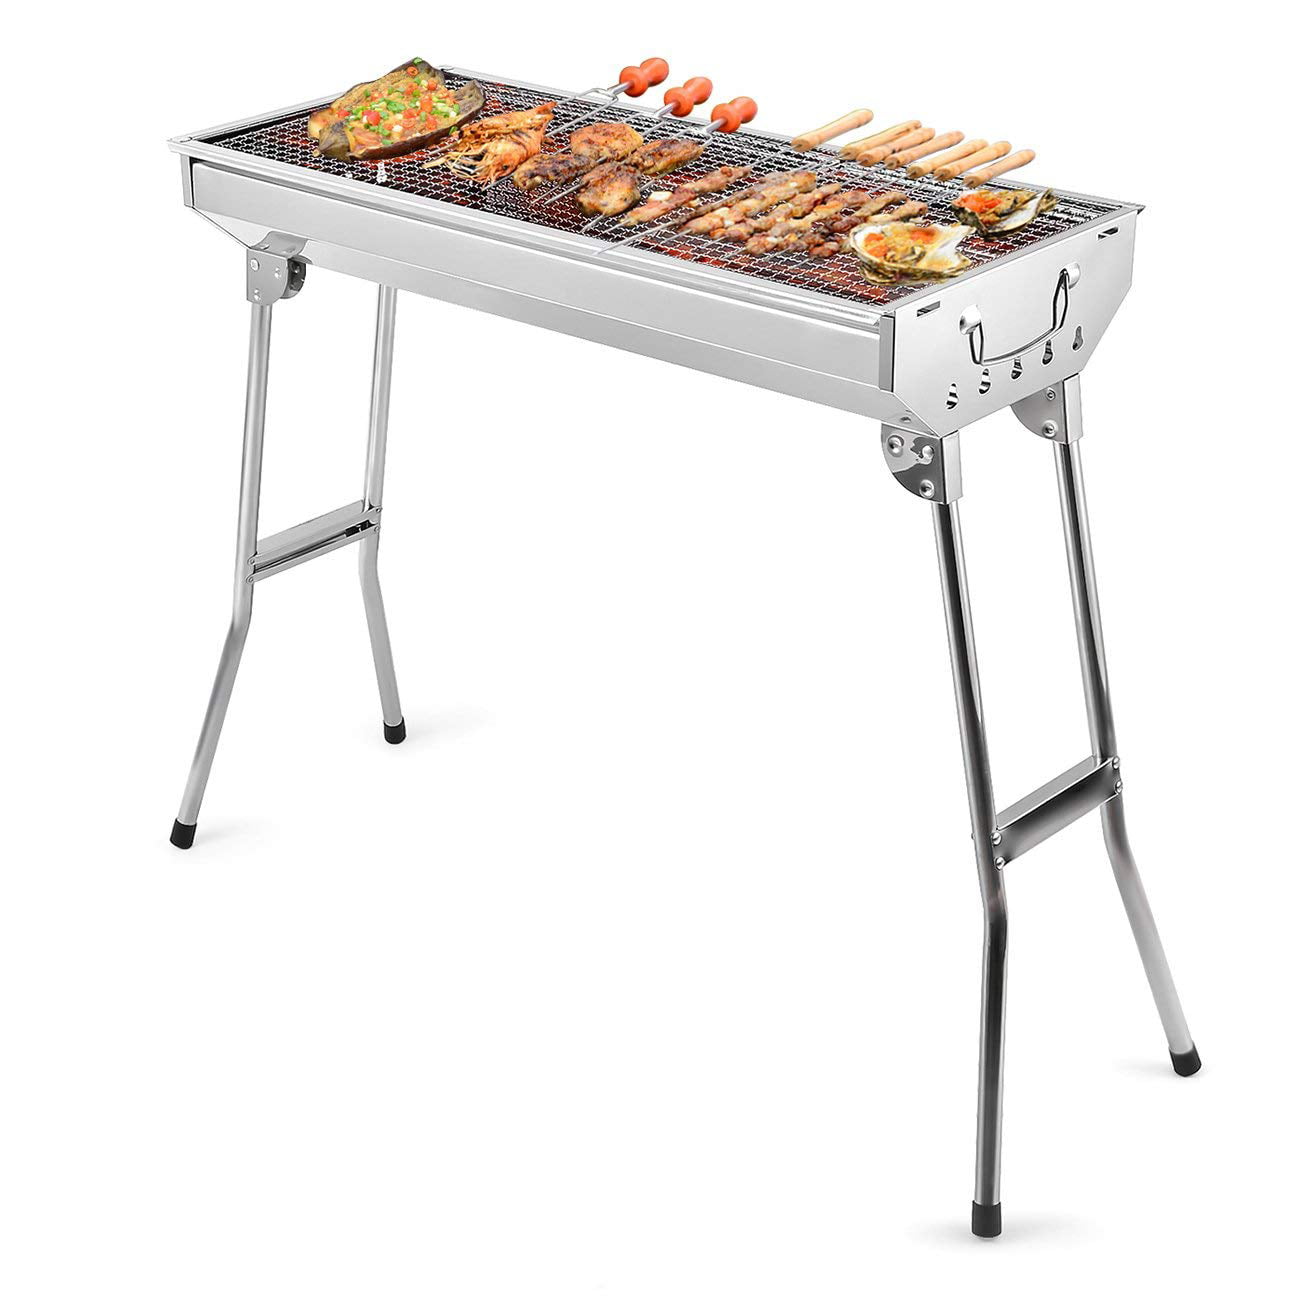 Portable Folding Charcoal BBQ Grill Table Stainless Steel BBQ Barbecue Grill 